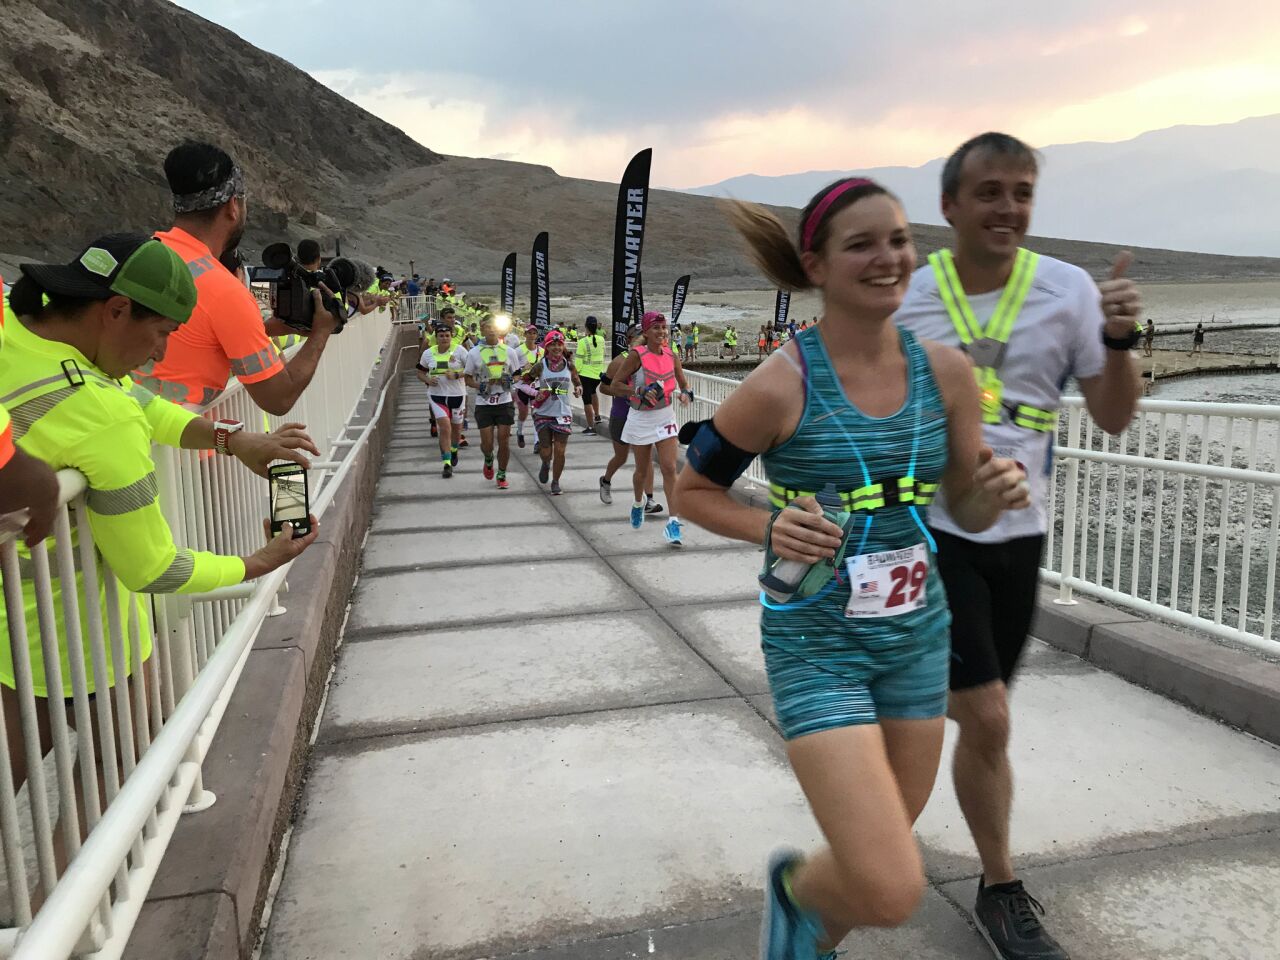 The first runners off the mark at the Badwater Ultramarathon are Kayla Delk, 30, and her husband, Kevin Delk, 34, from Greenville, TN.